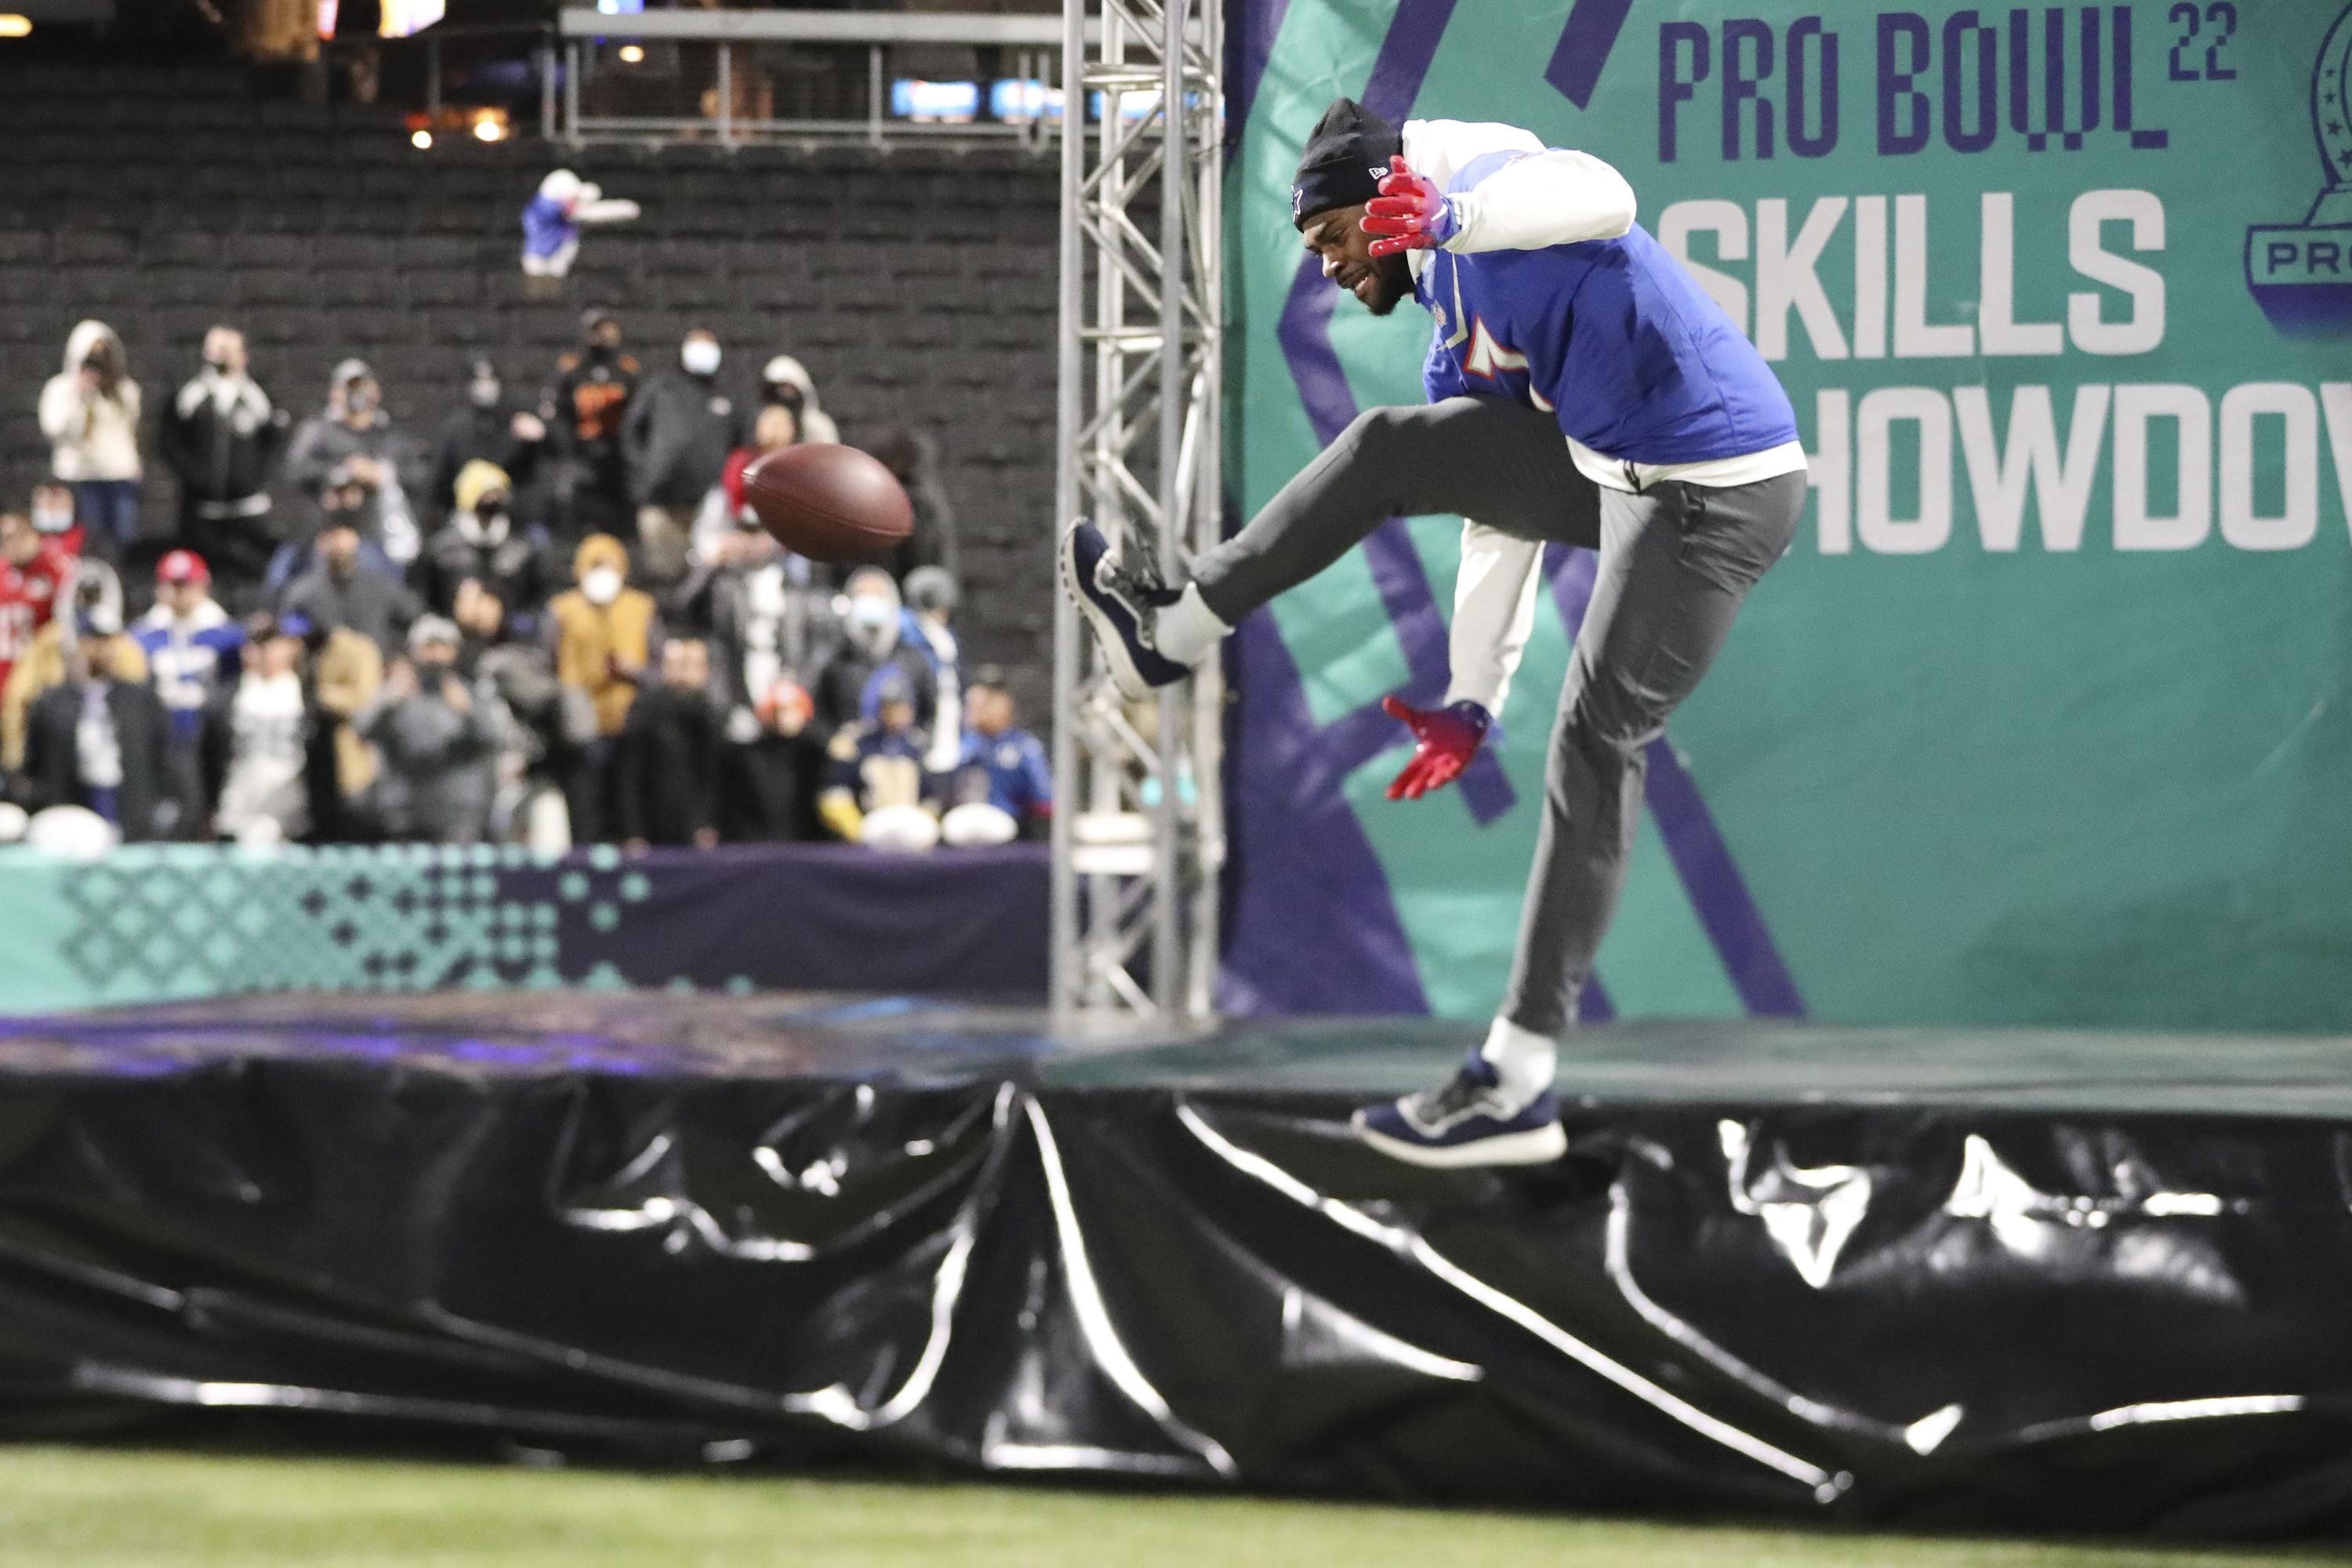 NFL Pro Bowl skills competitions announced The Associated Press en